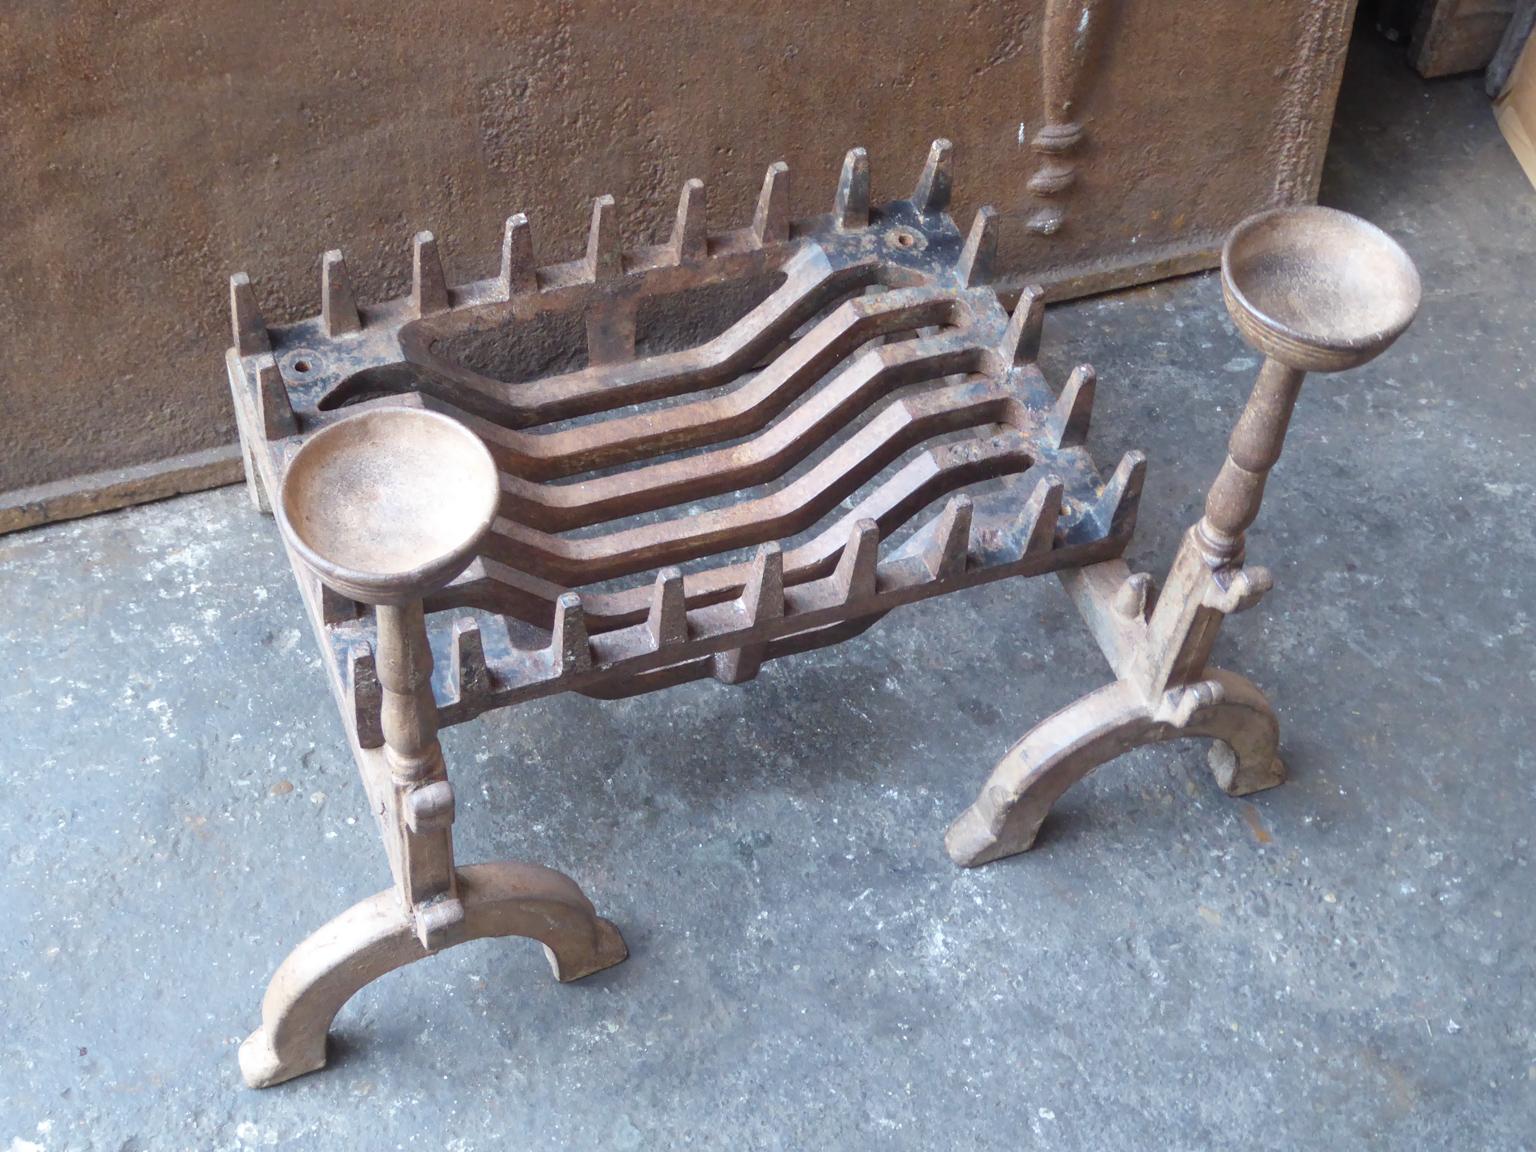 British  Antique English Victorian Fireplace Grate or Fire Grate, 19th Century